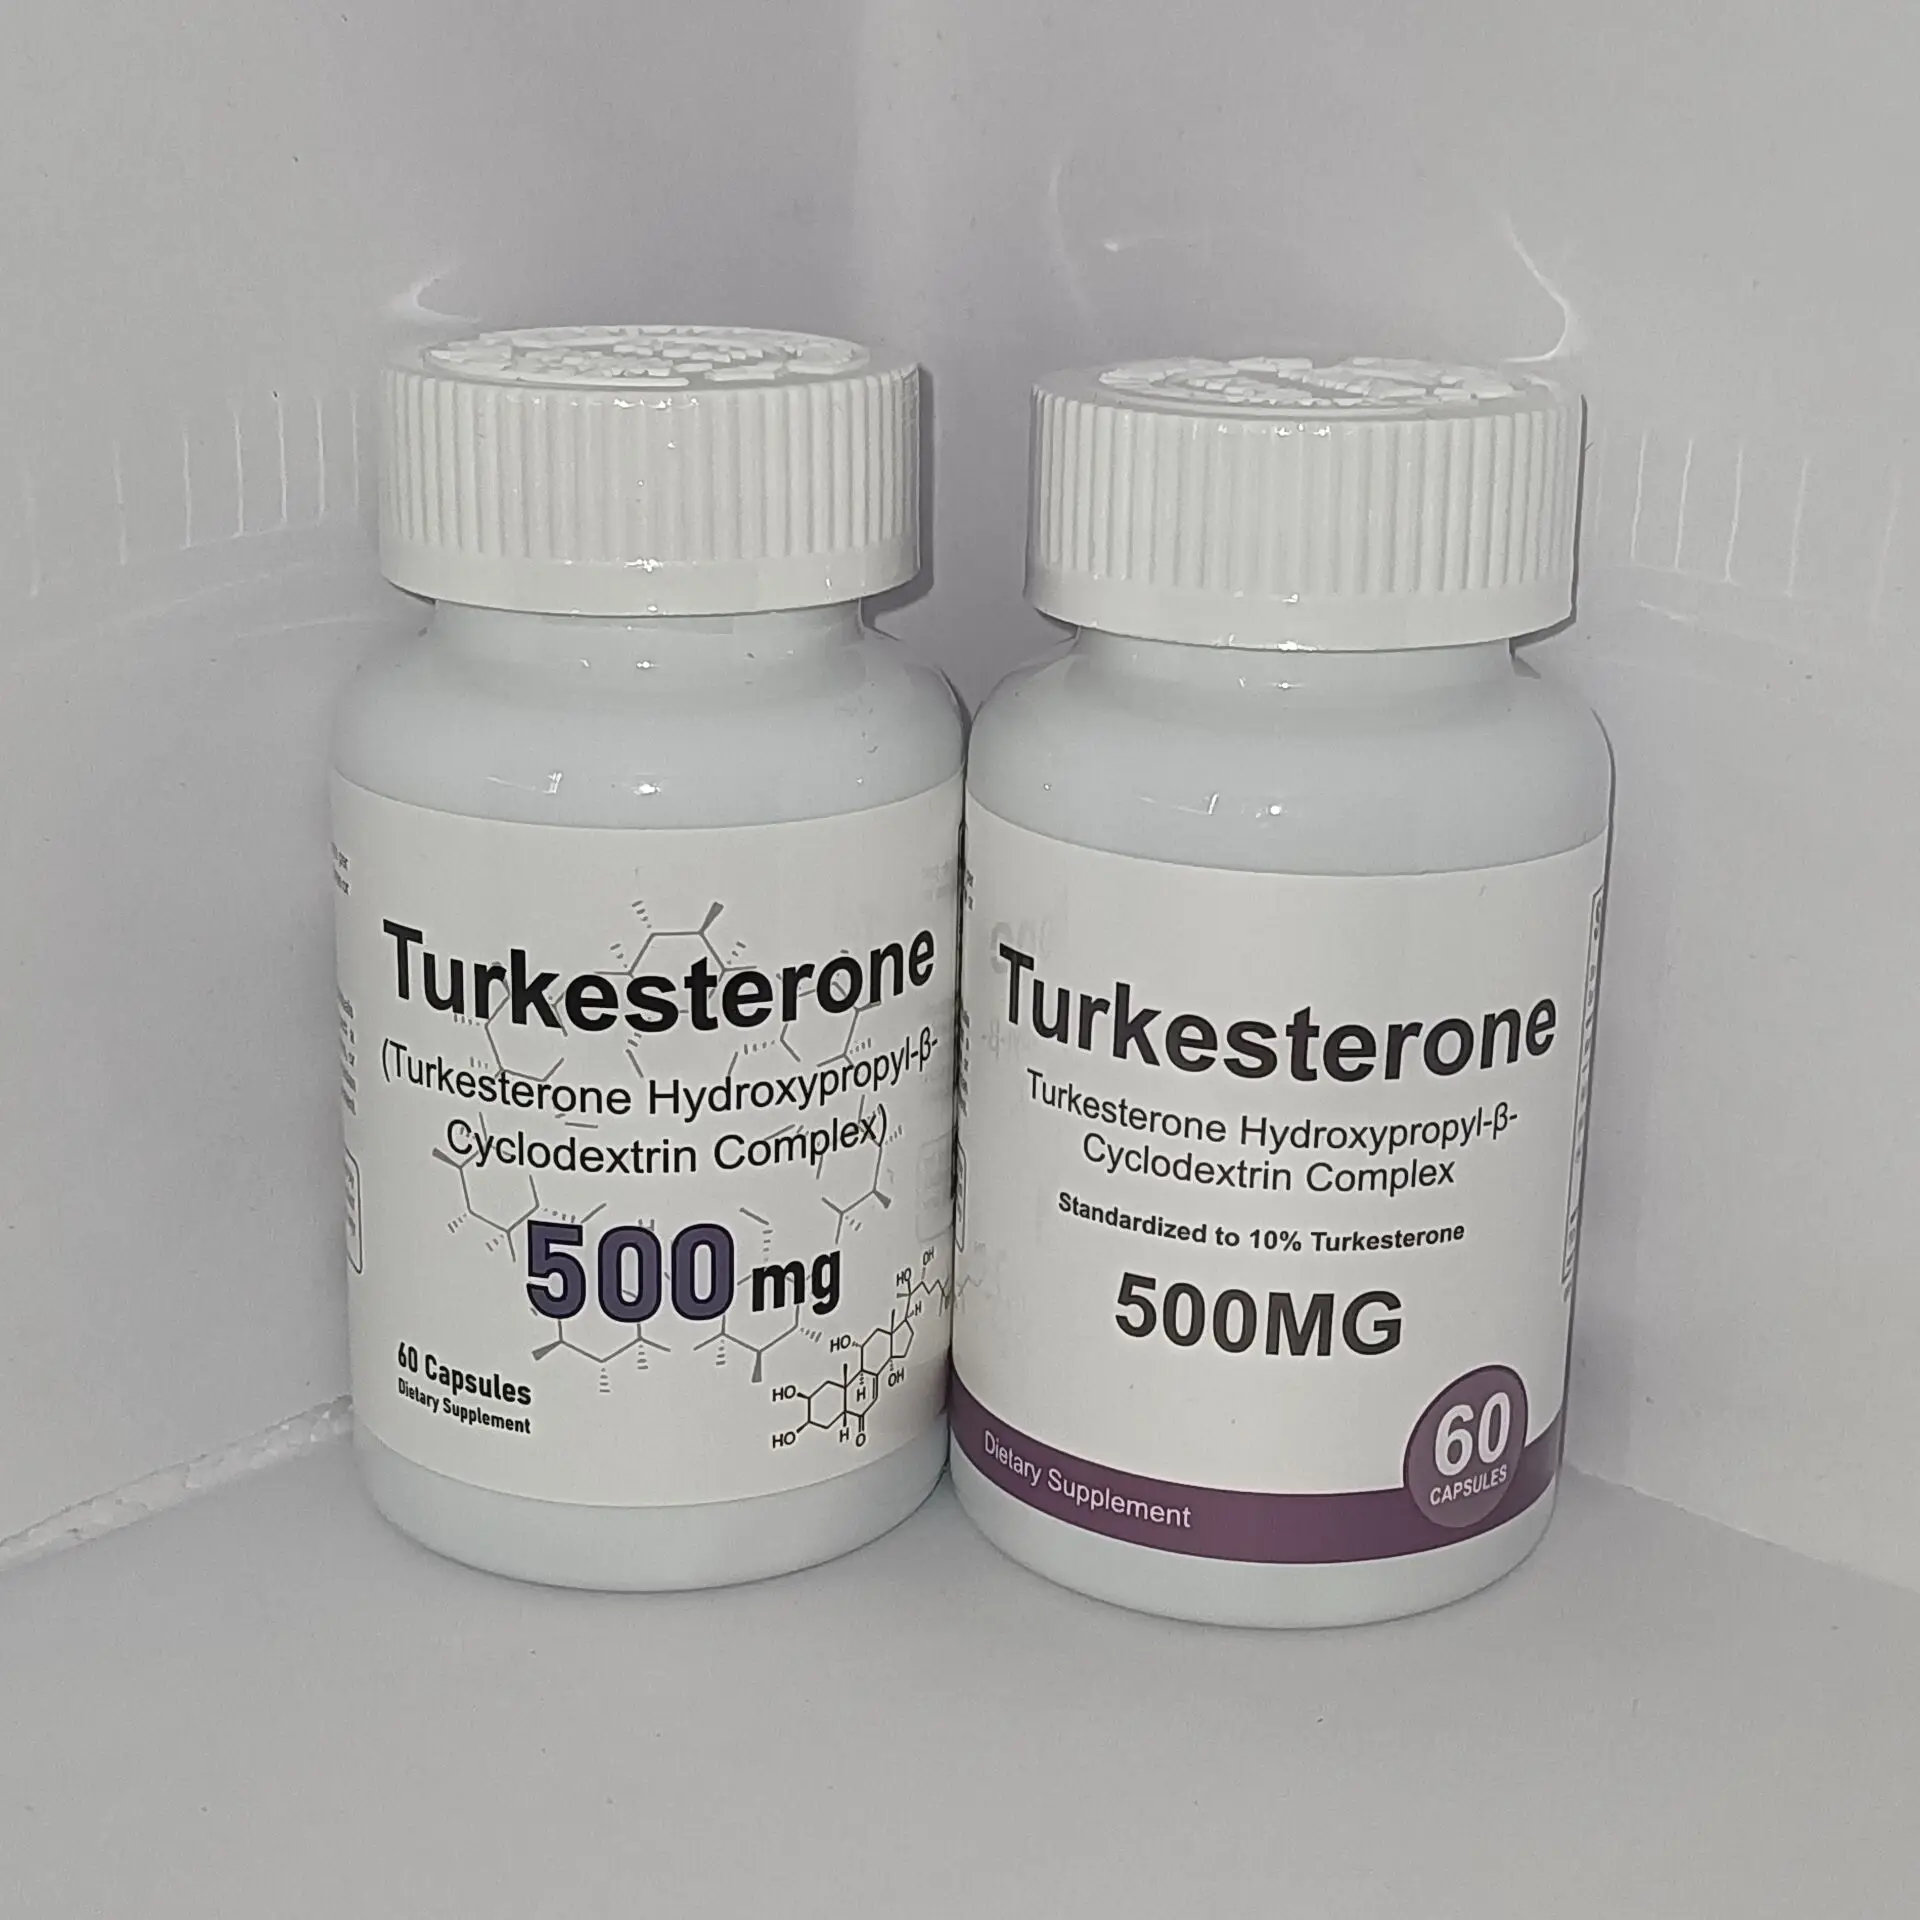 

2 bottles 500mg Turkesterone Capsules Helping exercise muscles burn fat Maintain energy levels Male Health food